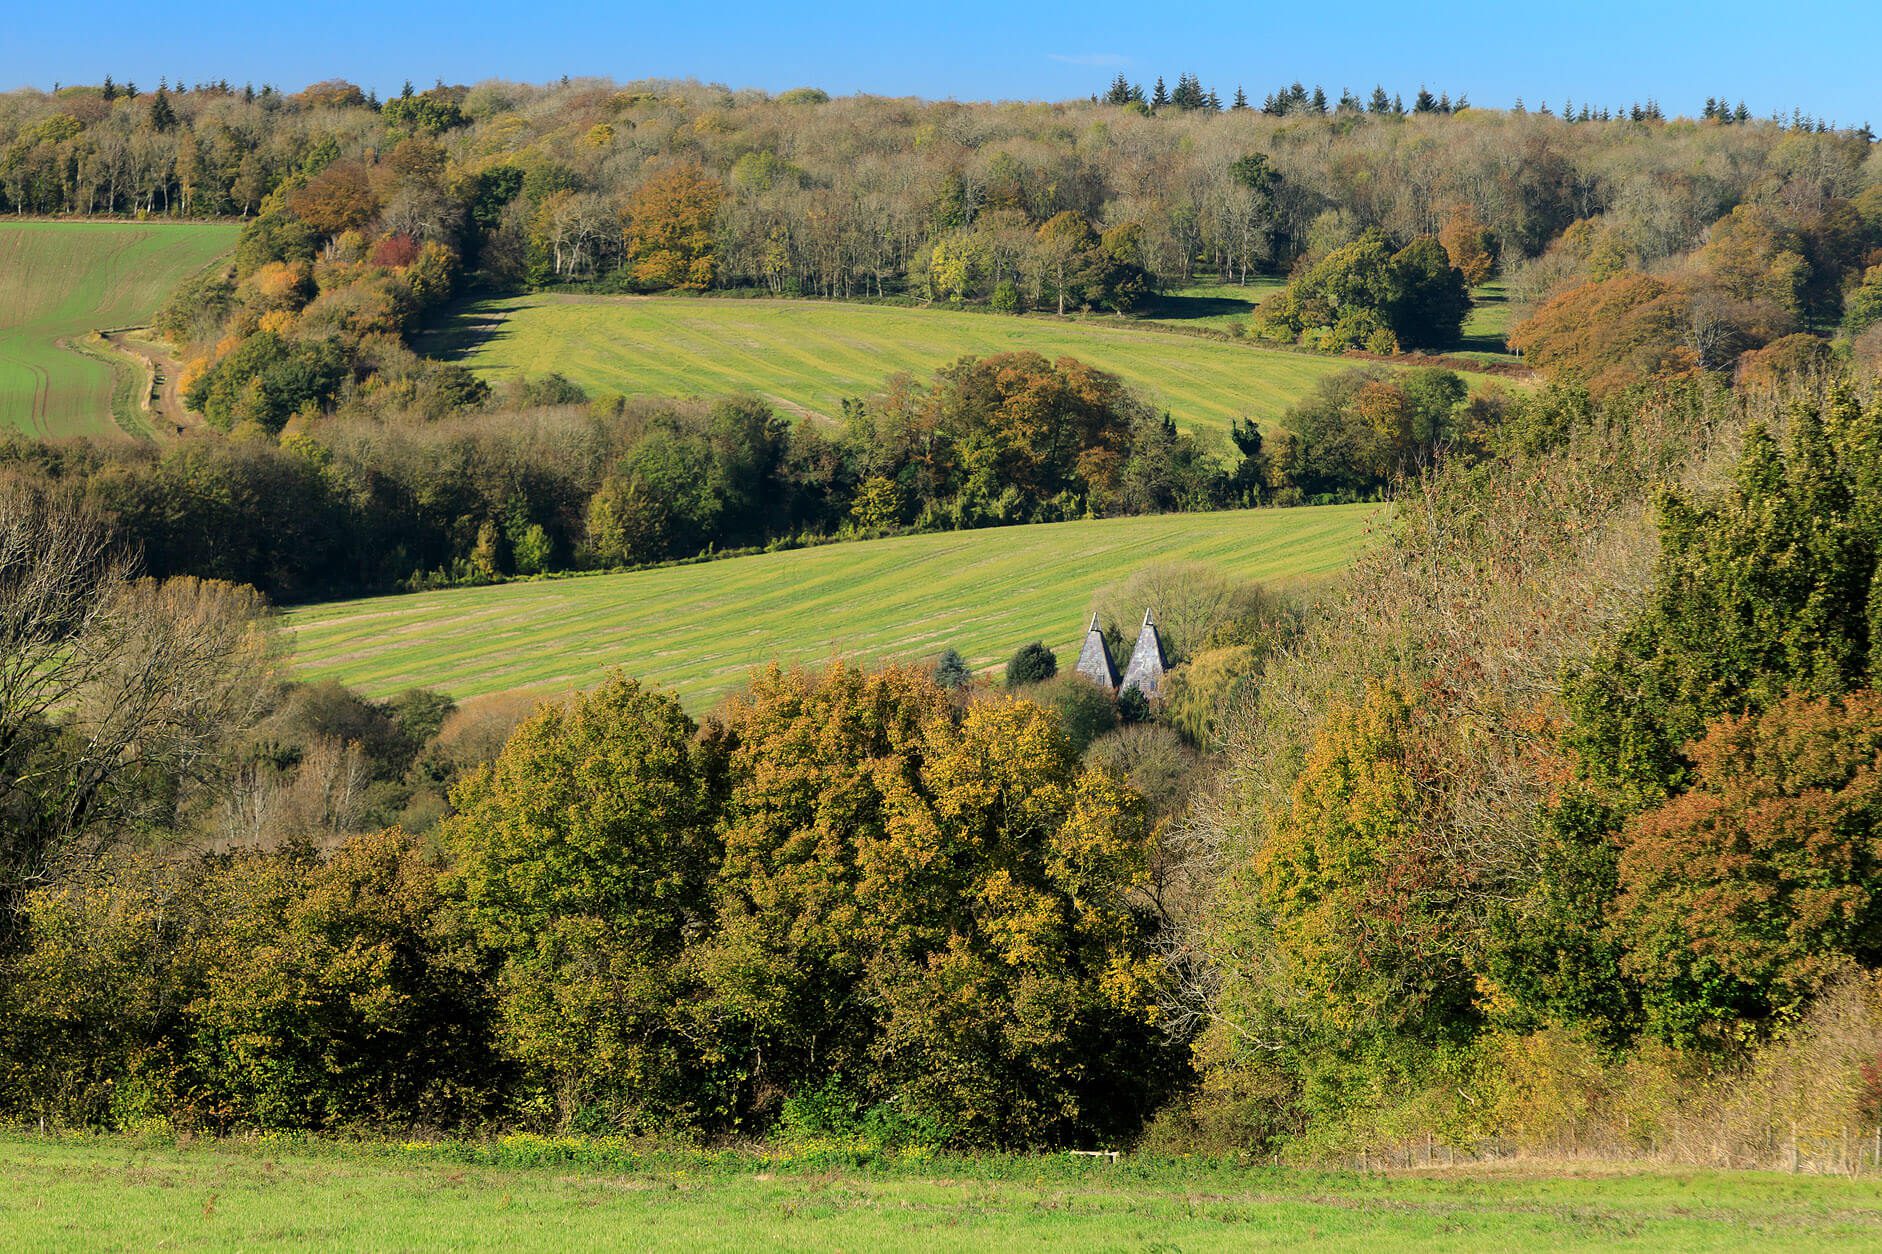 View across Stour Valley. Green fields, and trees in autumn.